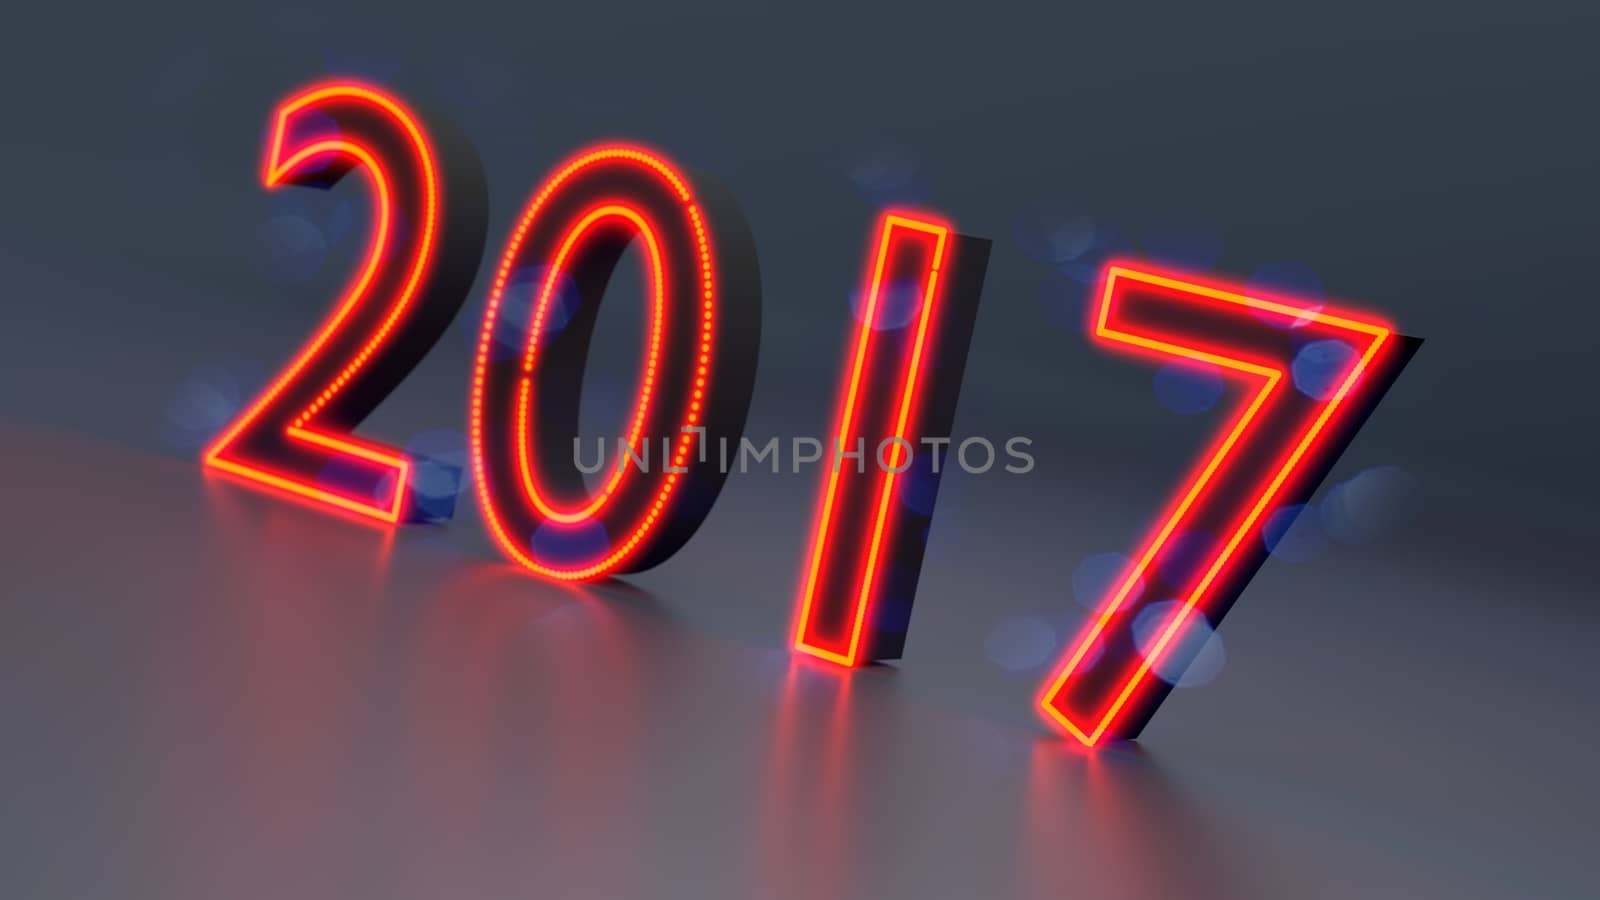 New Year 2017 abstract background, 3d illustration